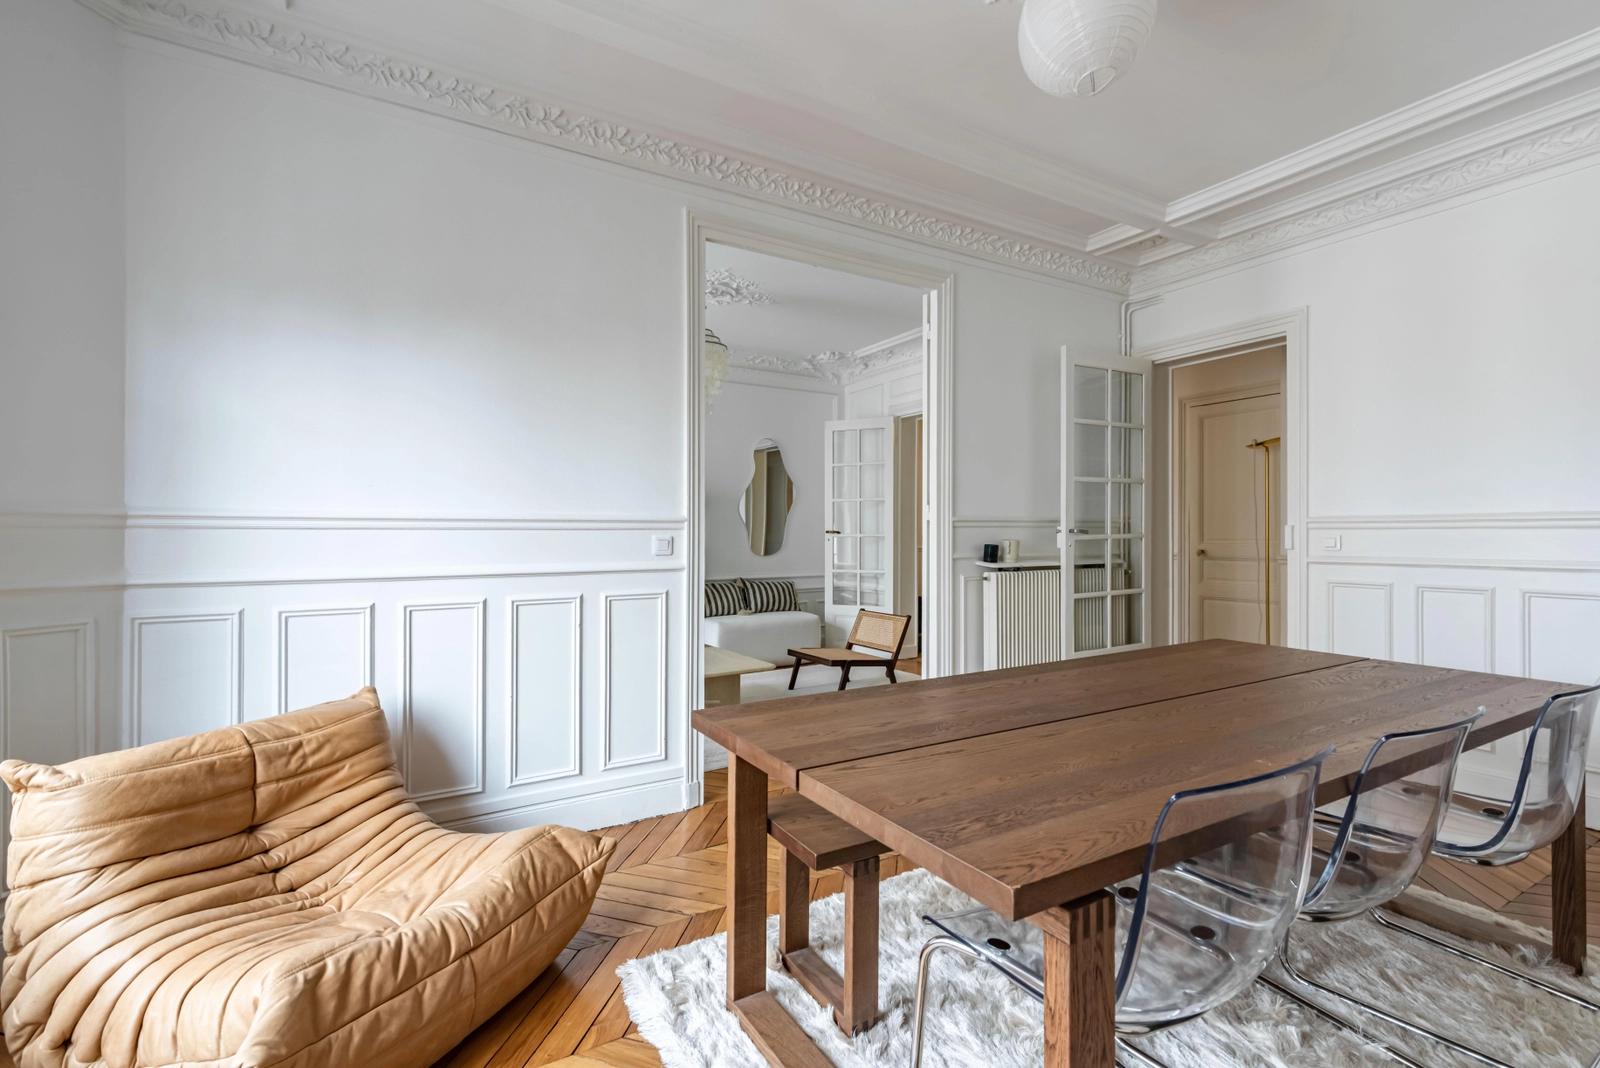 Meeting room in Sublime, light-filled Haussmann apartment - 1